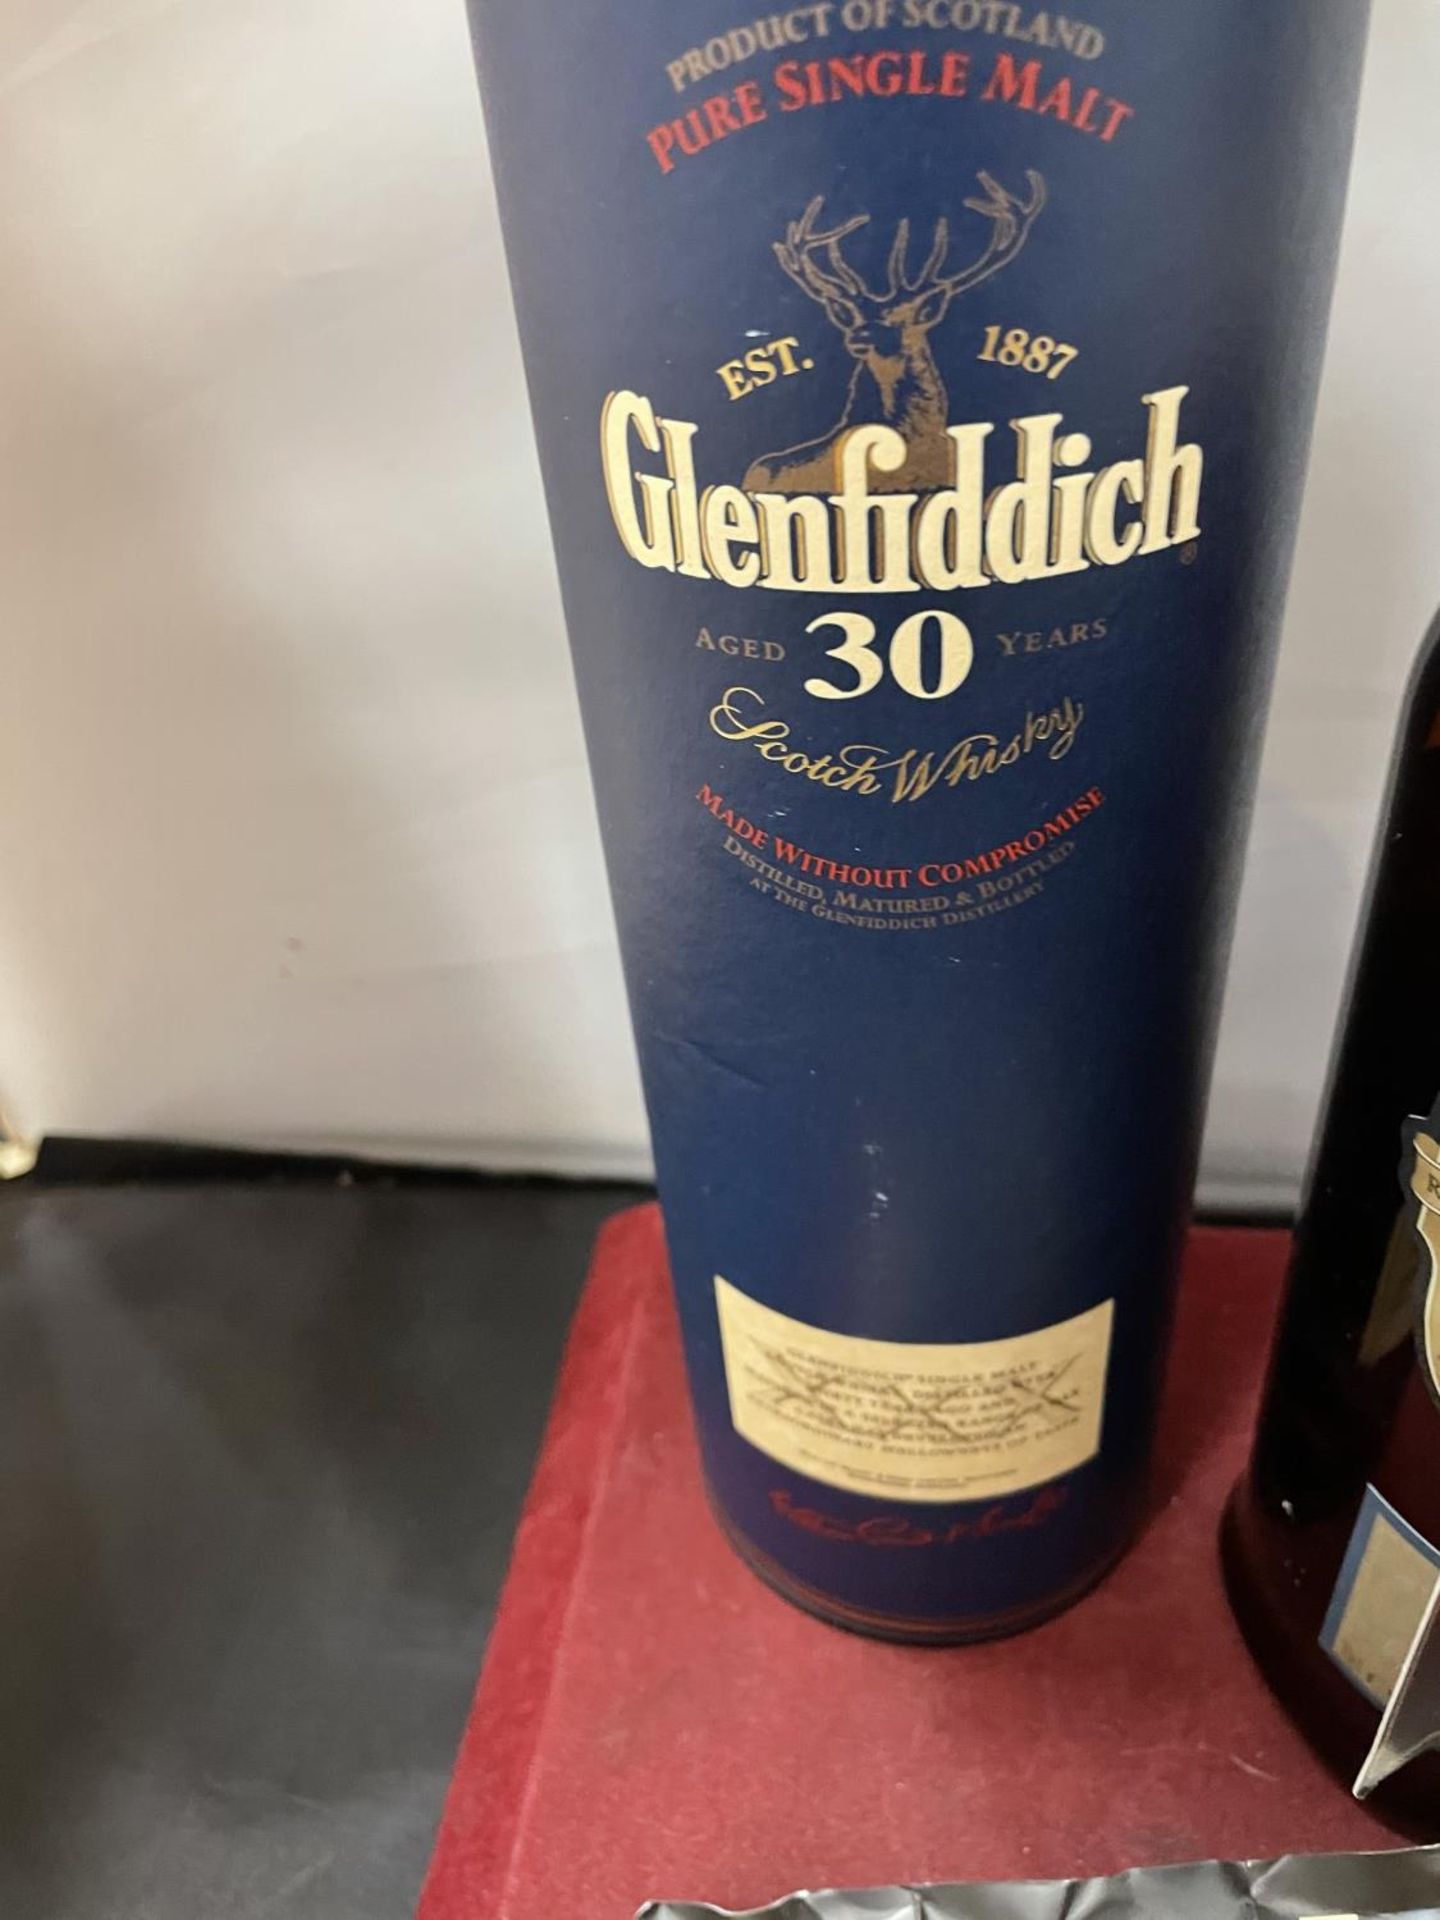 A 70 CL BOTTLE OF GLENFIDDICH AGED 30 YEARS SINGLE MALT - Image 4 of 4